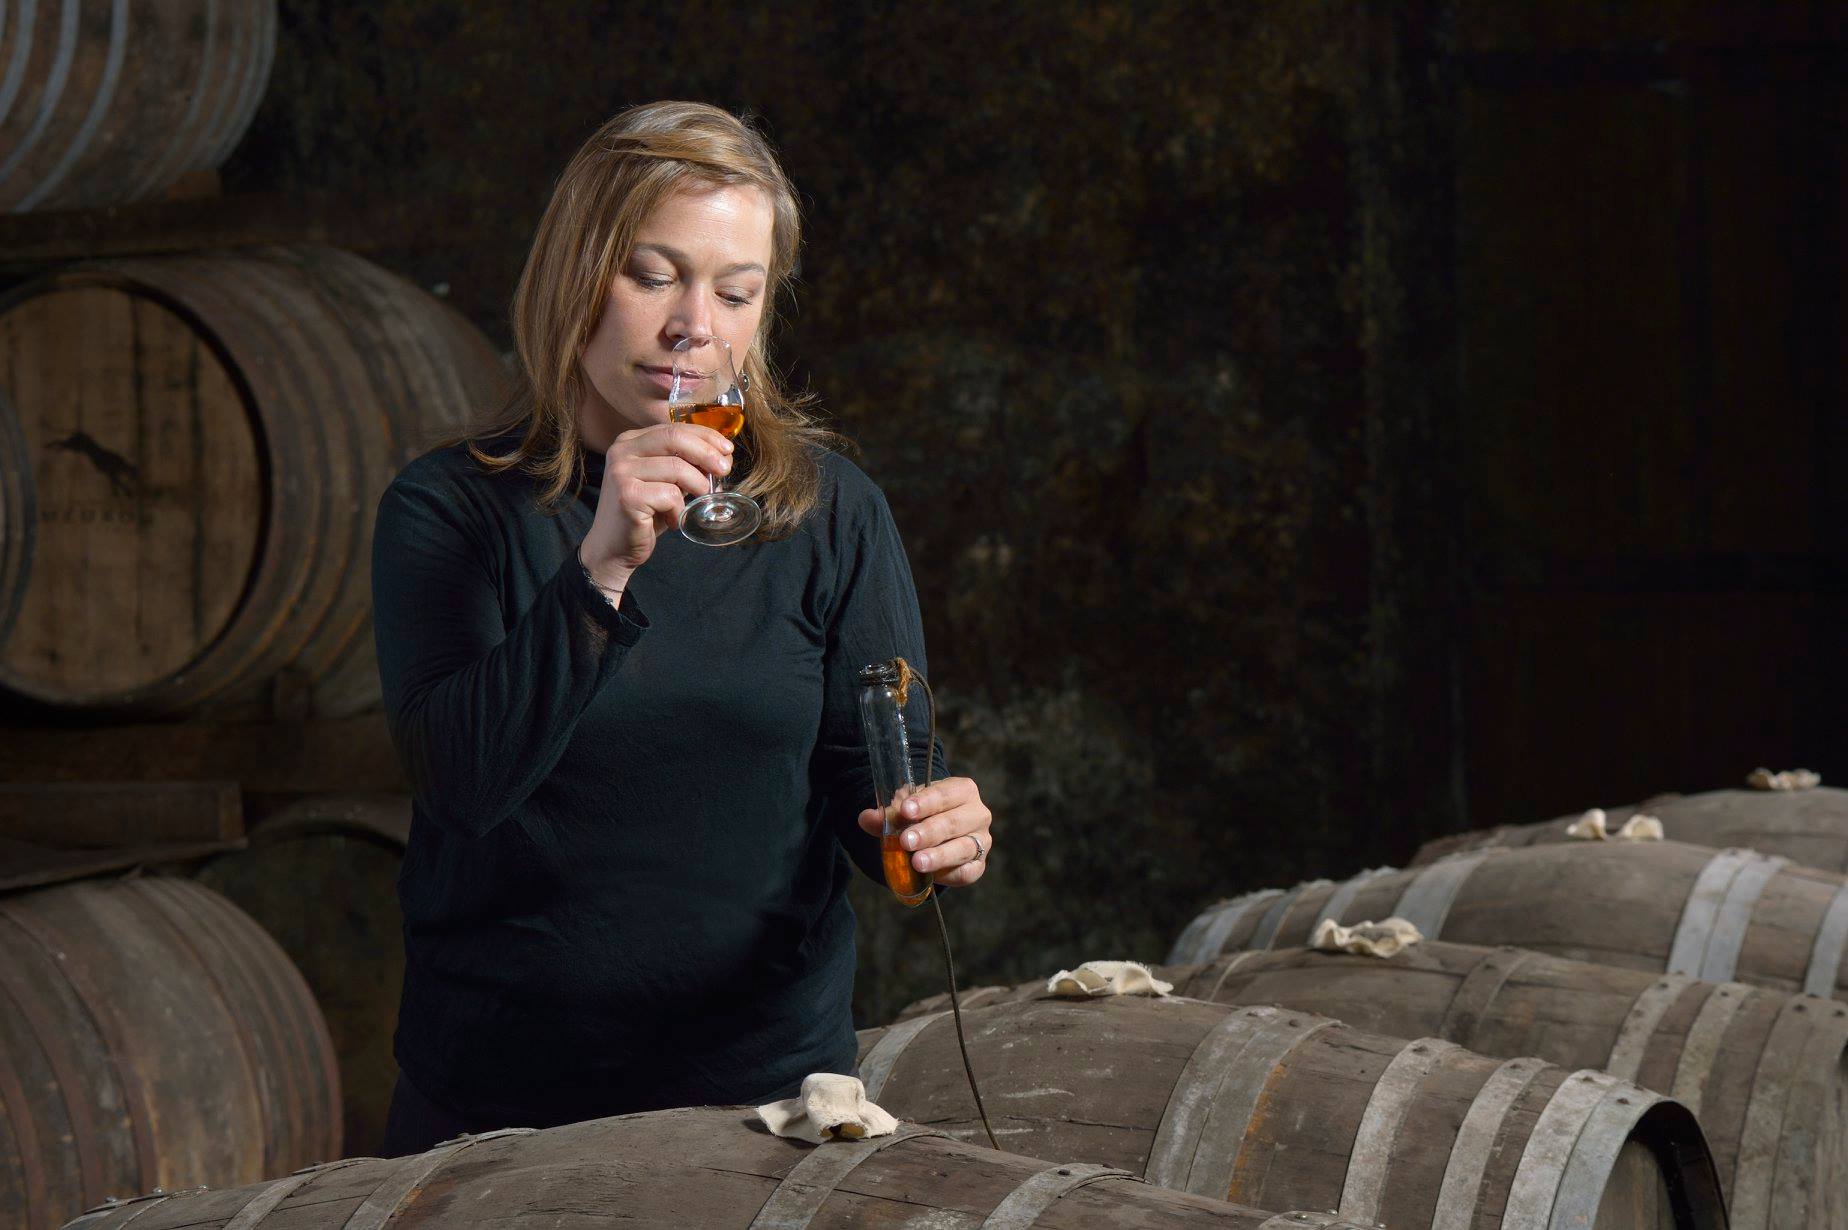 The Influential Women of Cognac: Who are they?